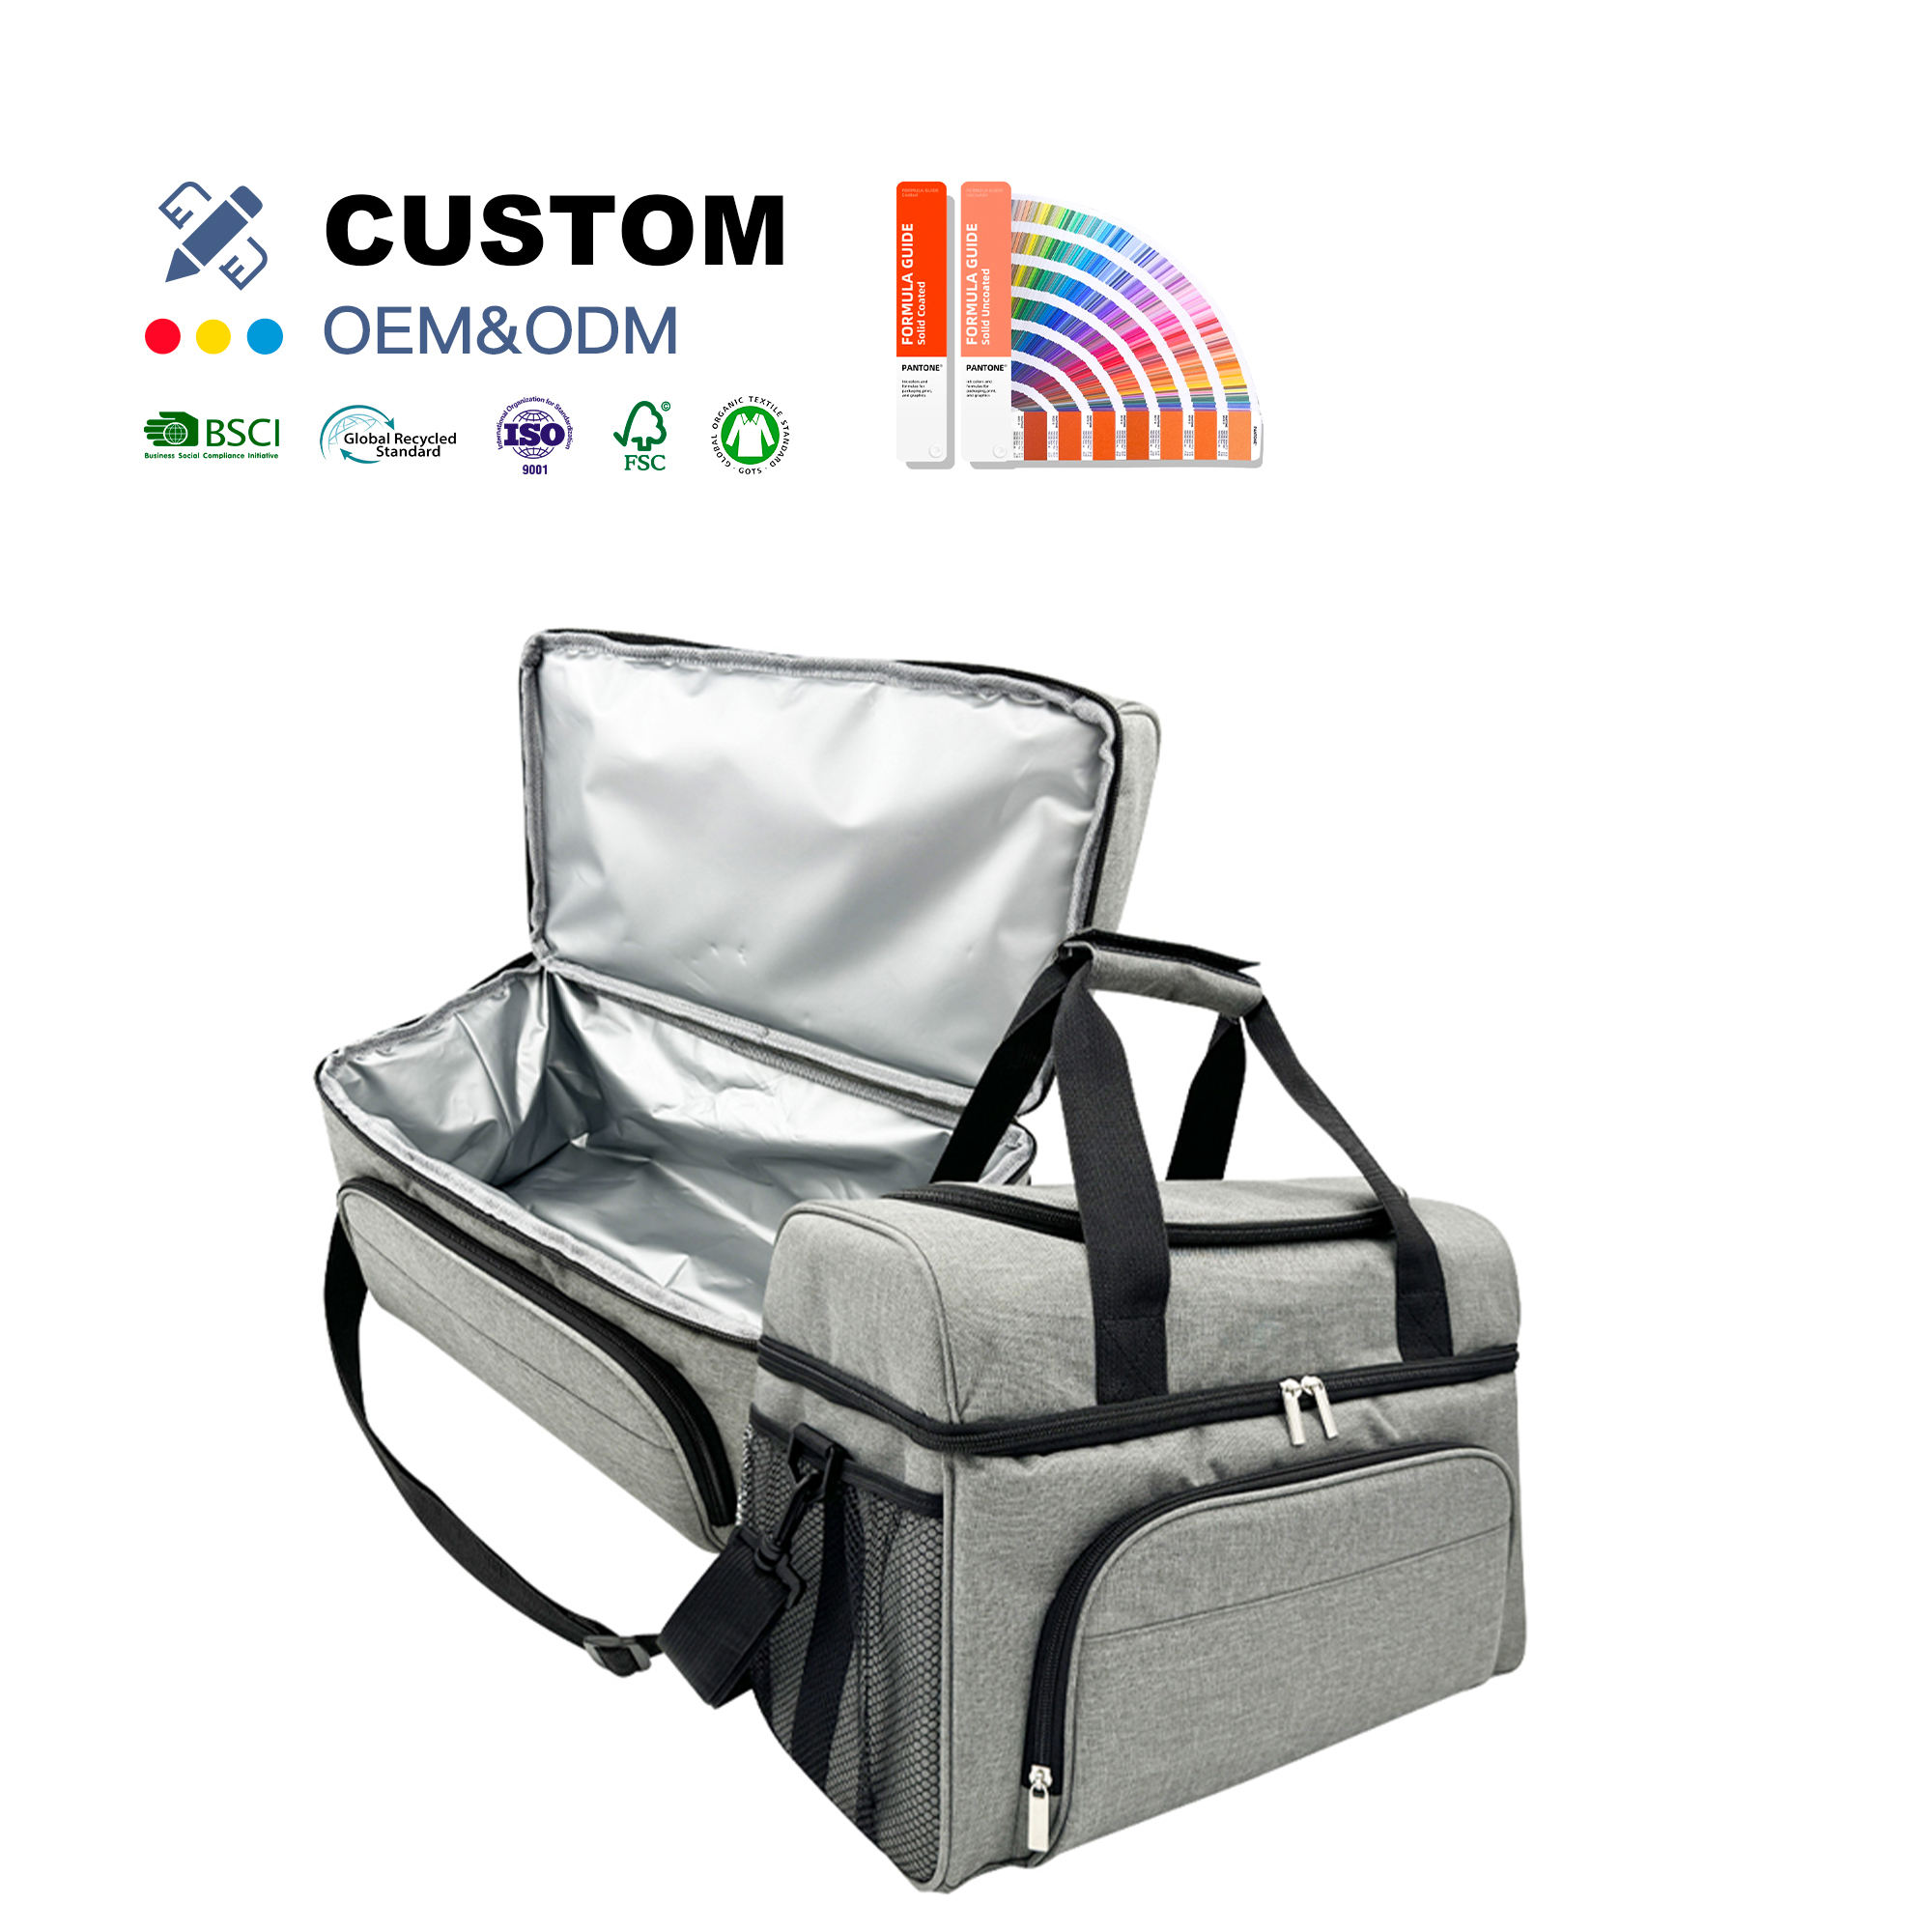 OEM ODM Kuoshi Custom Printed Portable Large 300D+ EPE form + PEVA Insulated Tote Bag Thermal Lunch Cooler Bag